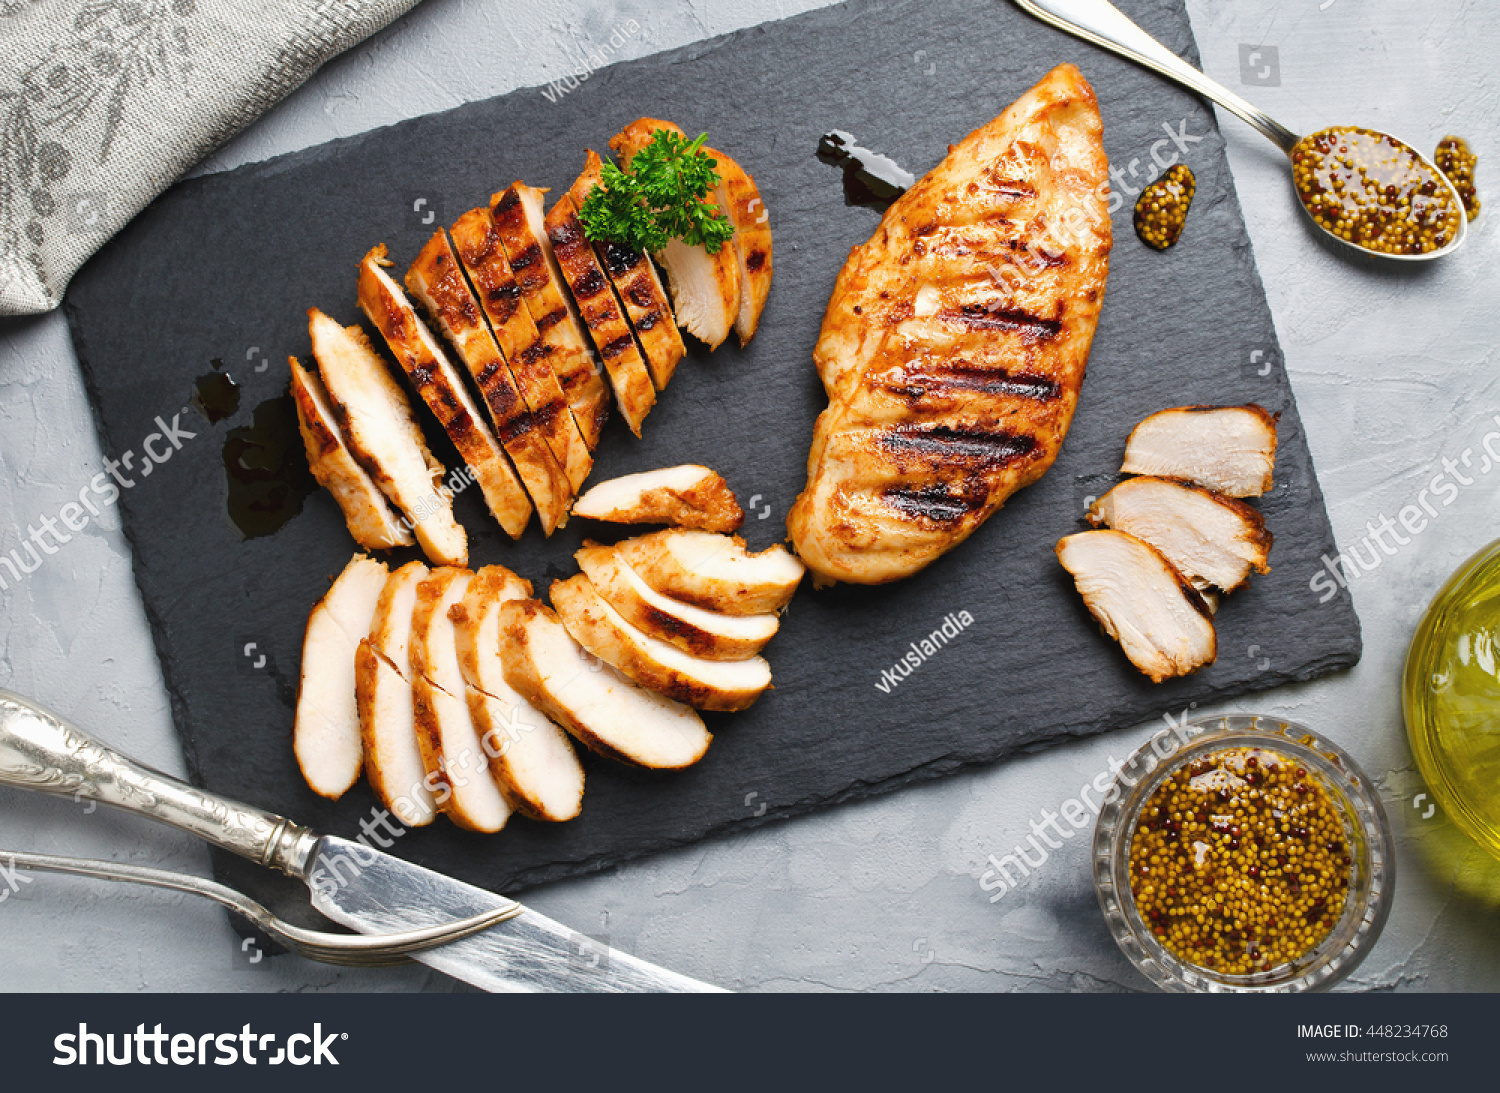 Grilled chicken fillets on slate plate. Gray concrete background #448234768